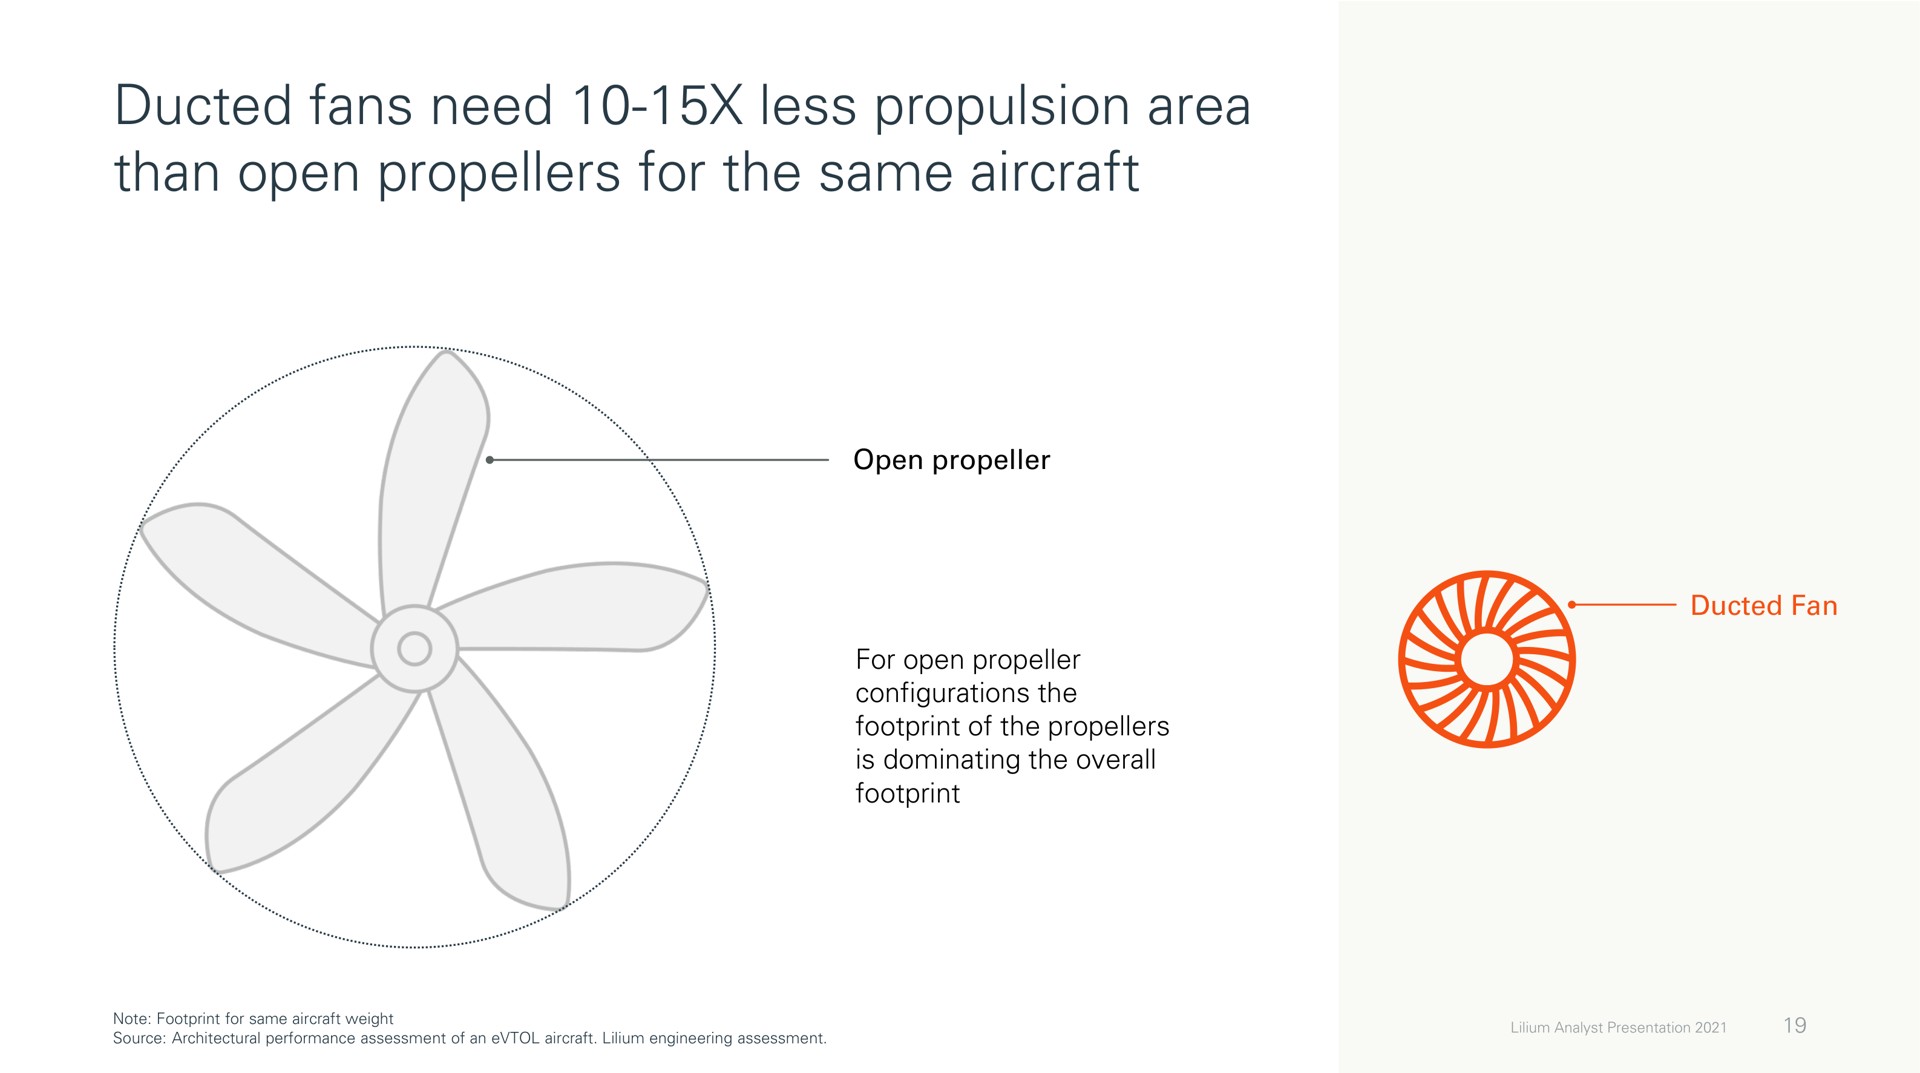 ducted fans need less propulsion area than open propellers for the same aircraft | Lilium